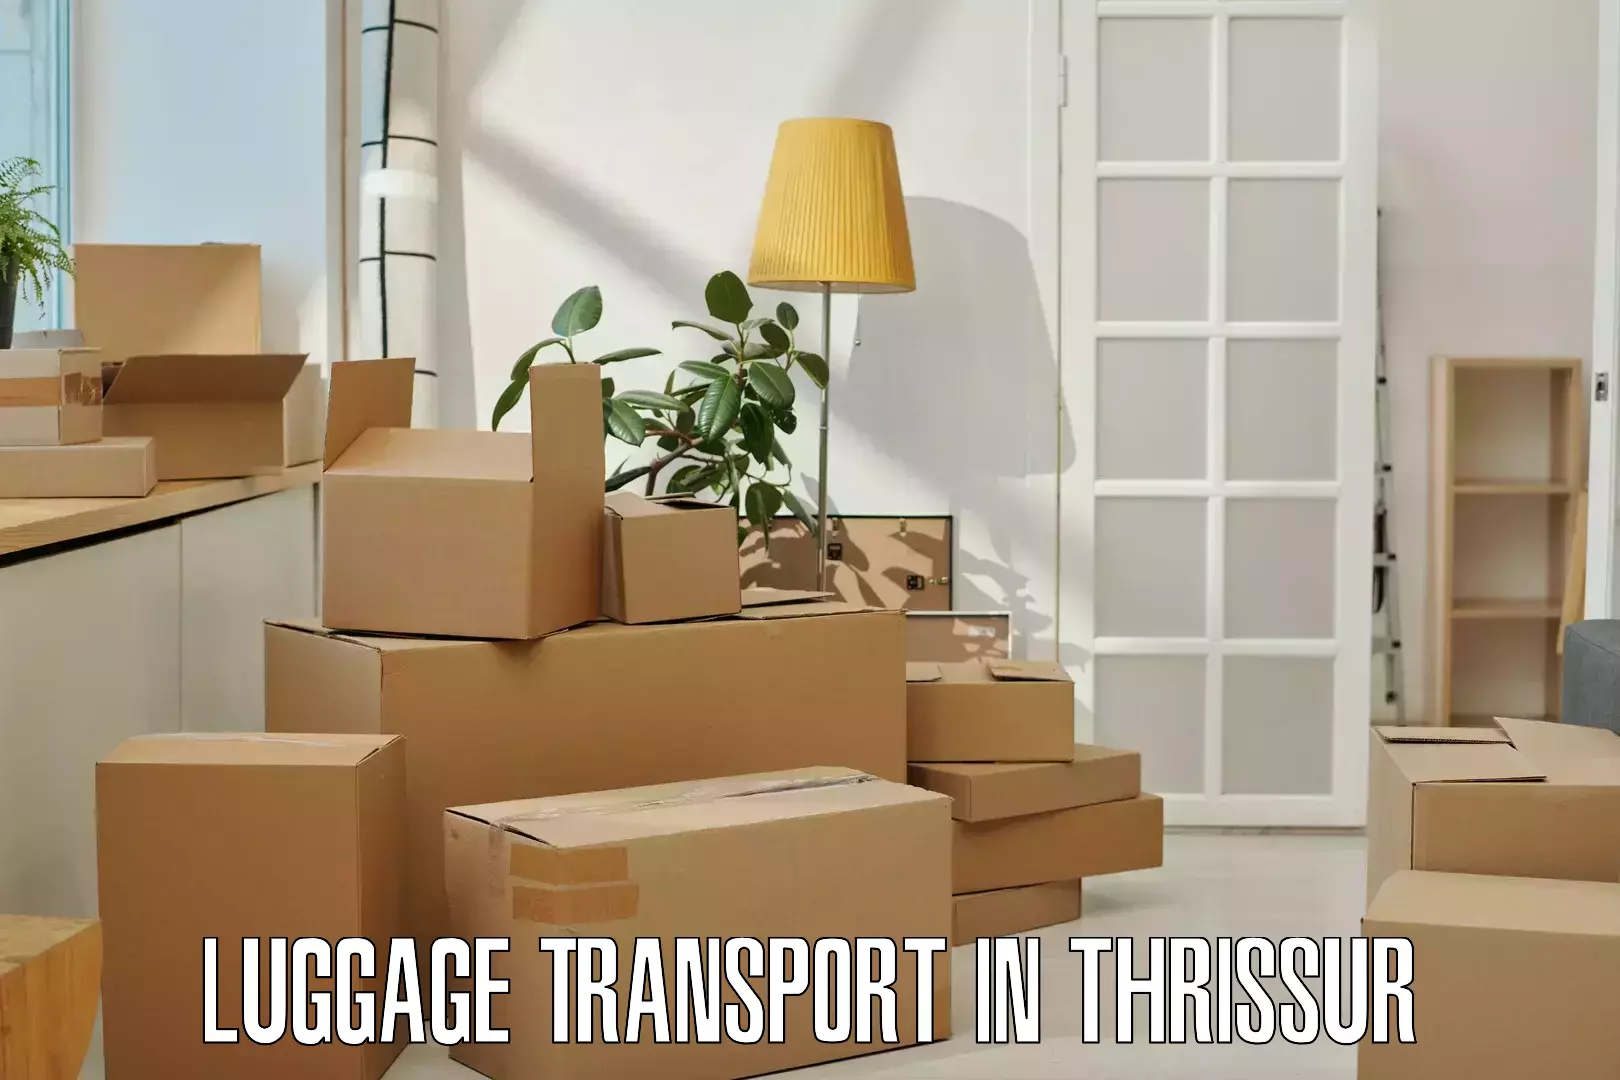 Premium luggage delivery in Thrissur